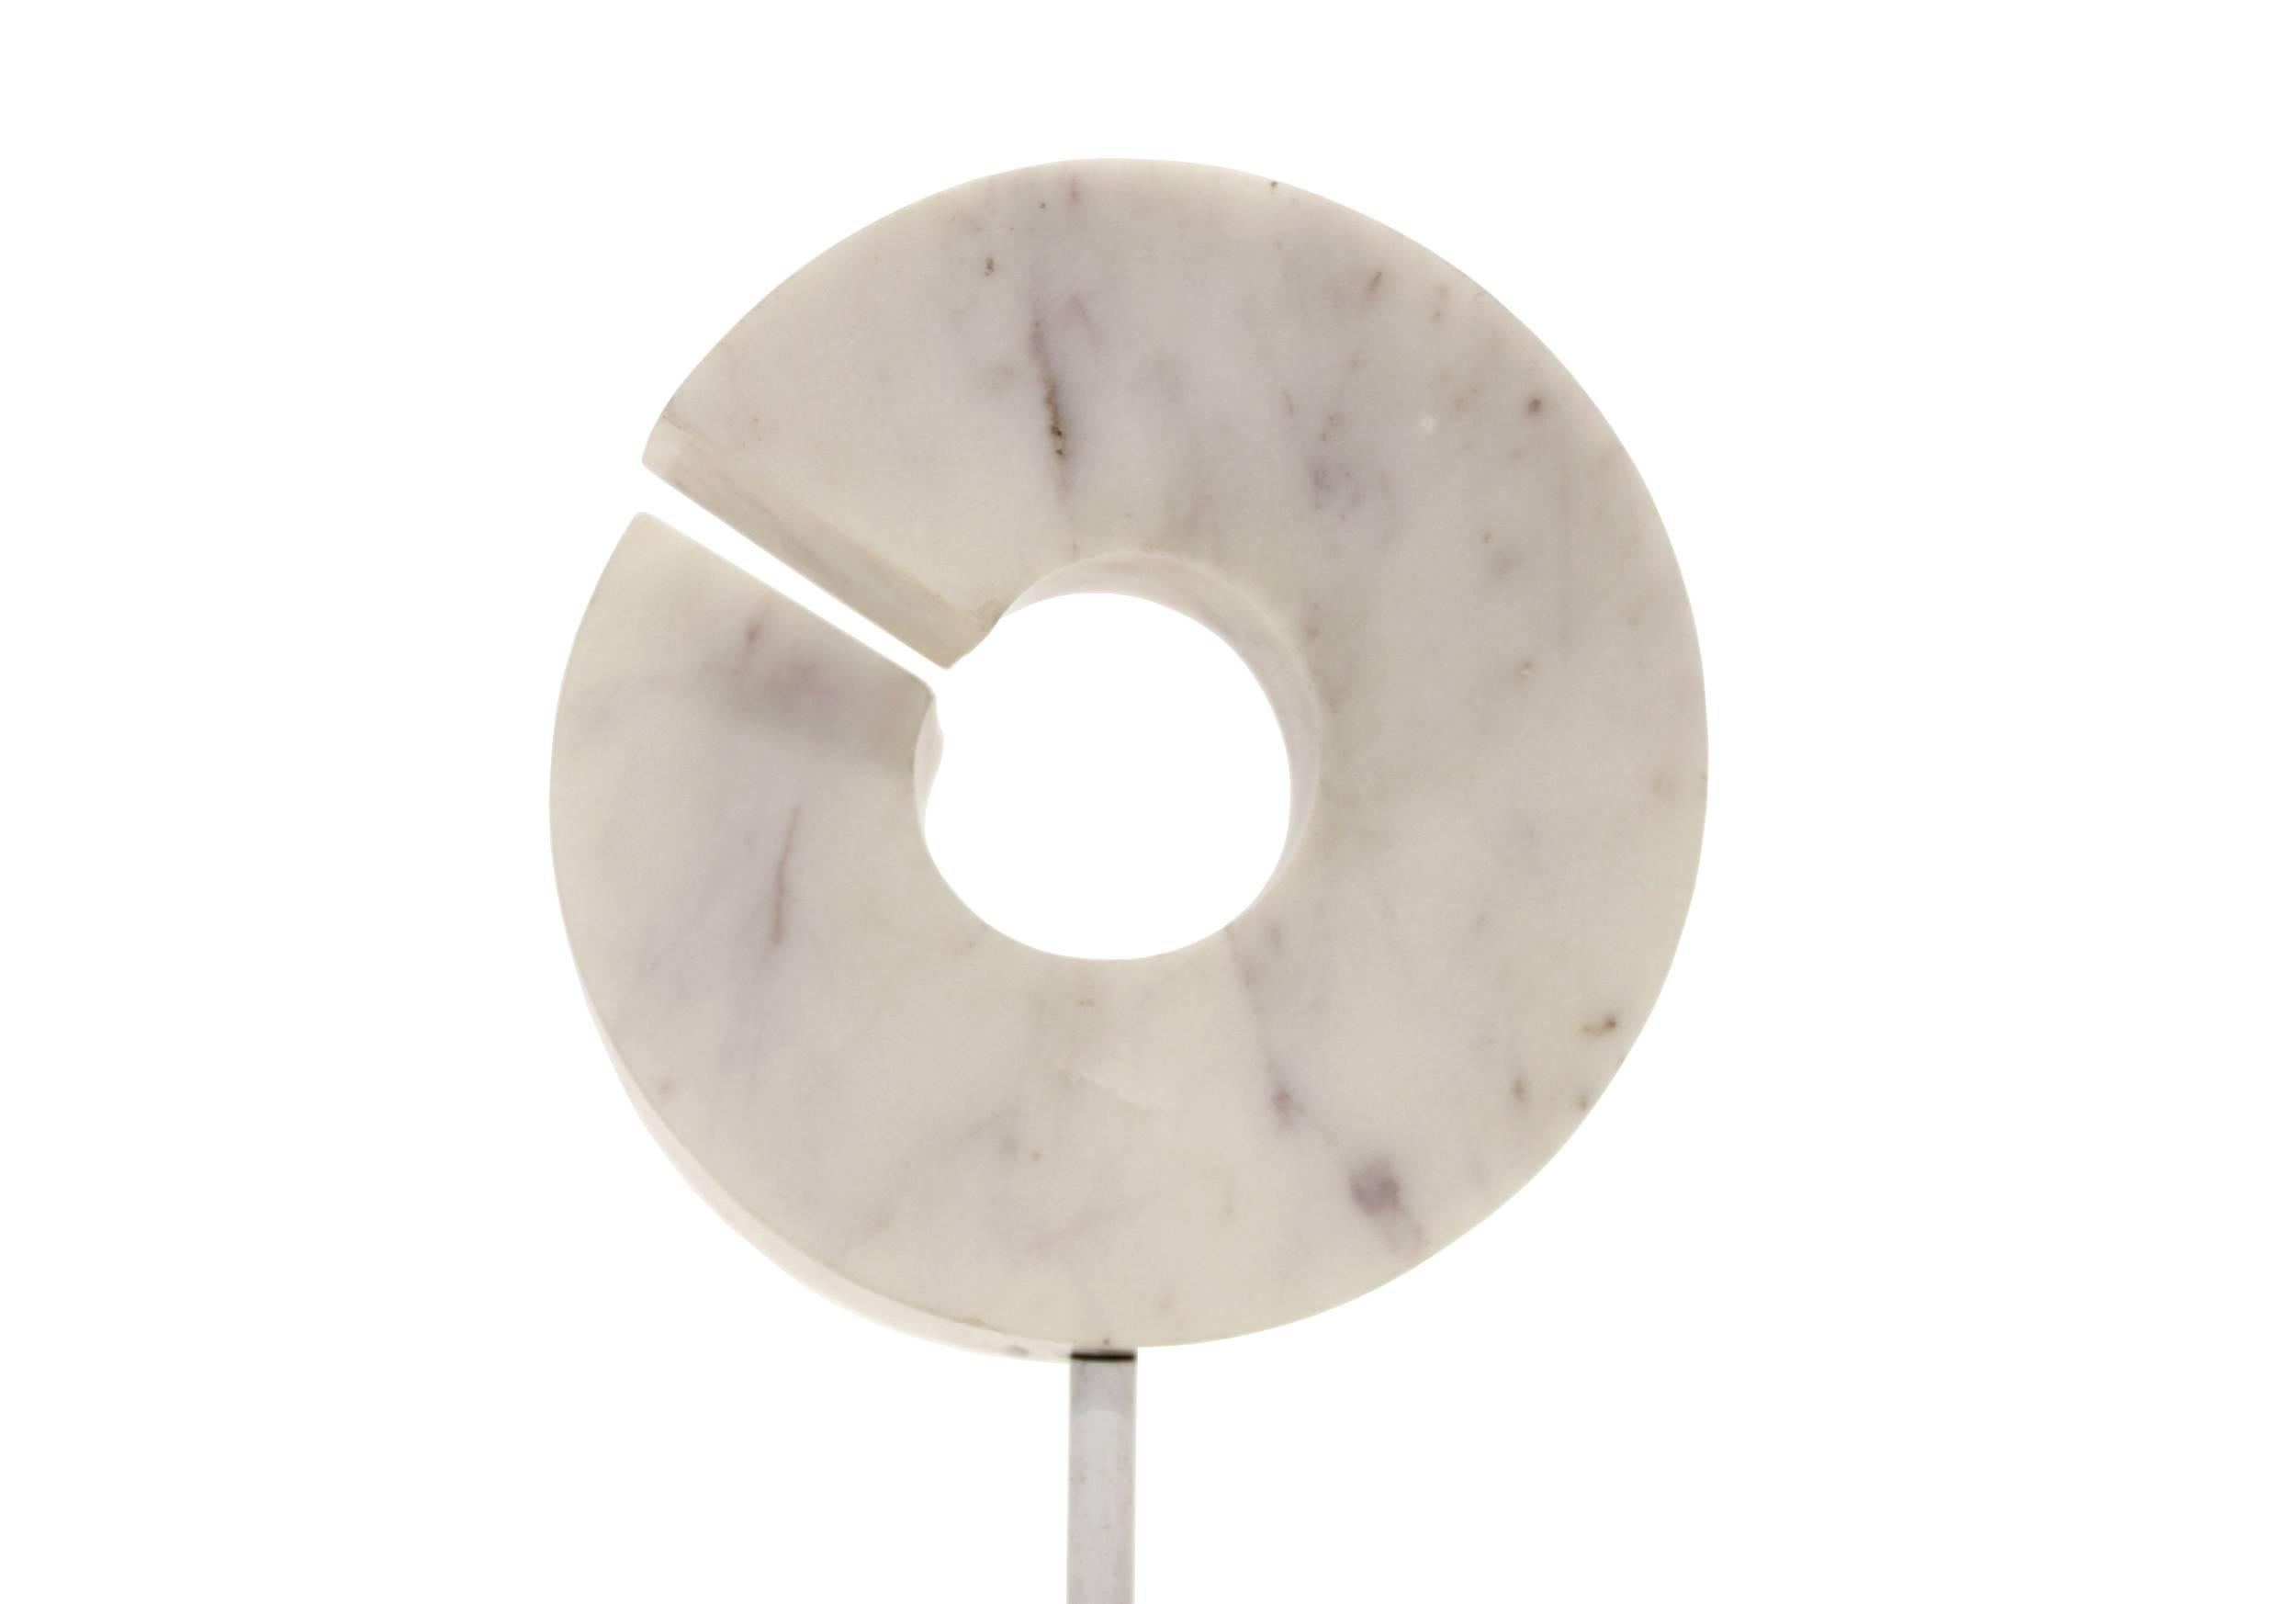 Organically shaped circular composition in marble. Made by Hilde Van Sumere, Belgium, circa 1970s first half. The sculpture is in excellent vintage condition. The sculpture is unsigned.